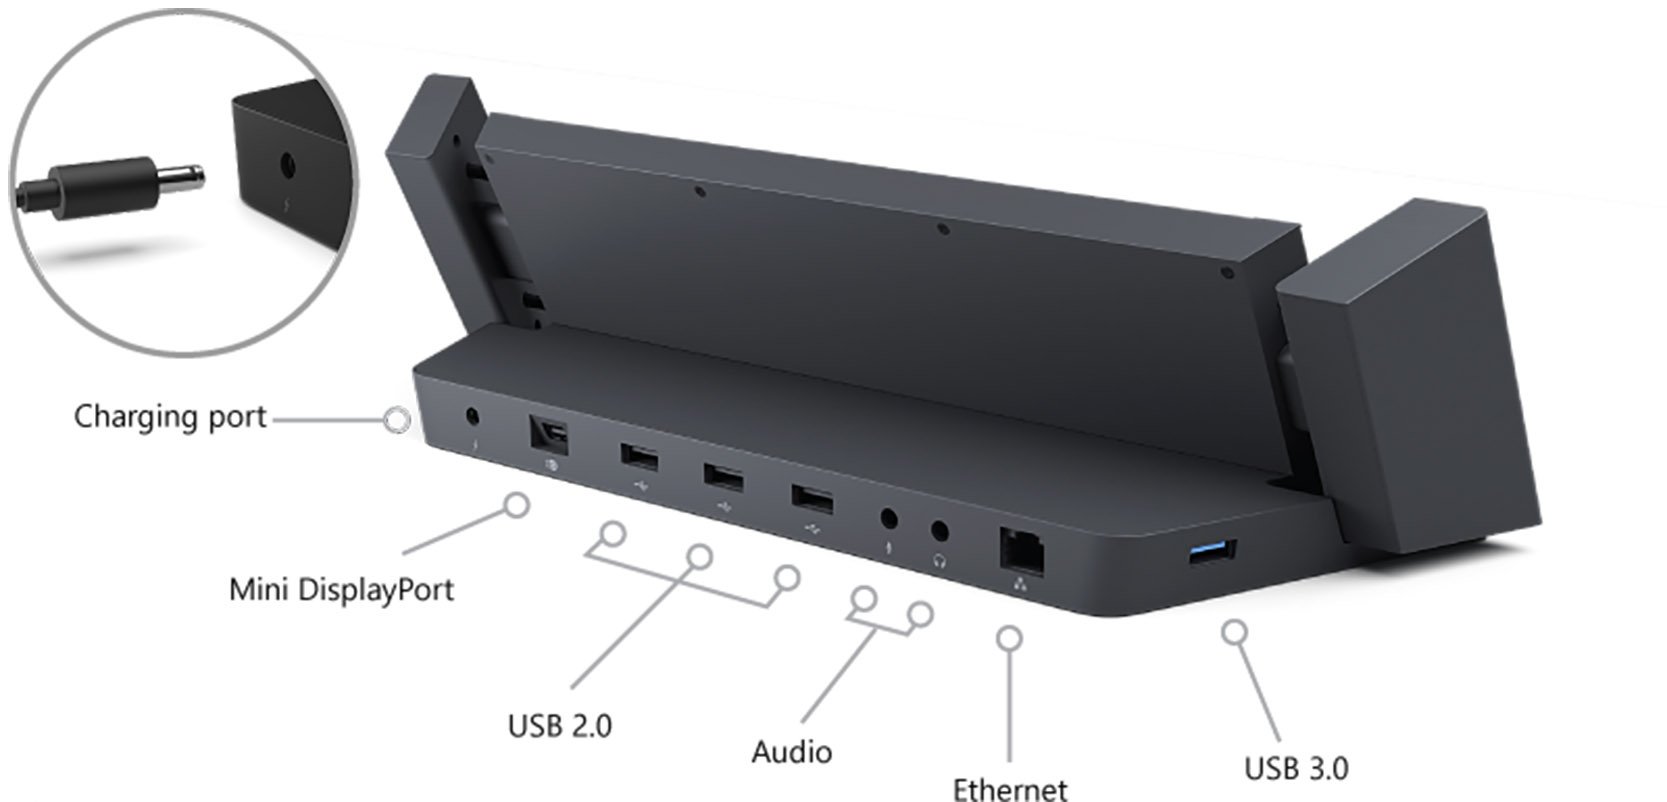 How to use your Surface Pro 3 docking station with a Surface Pro 4